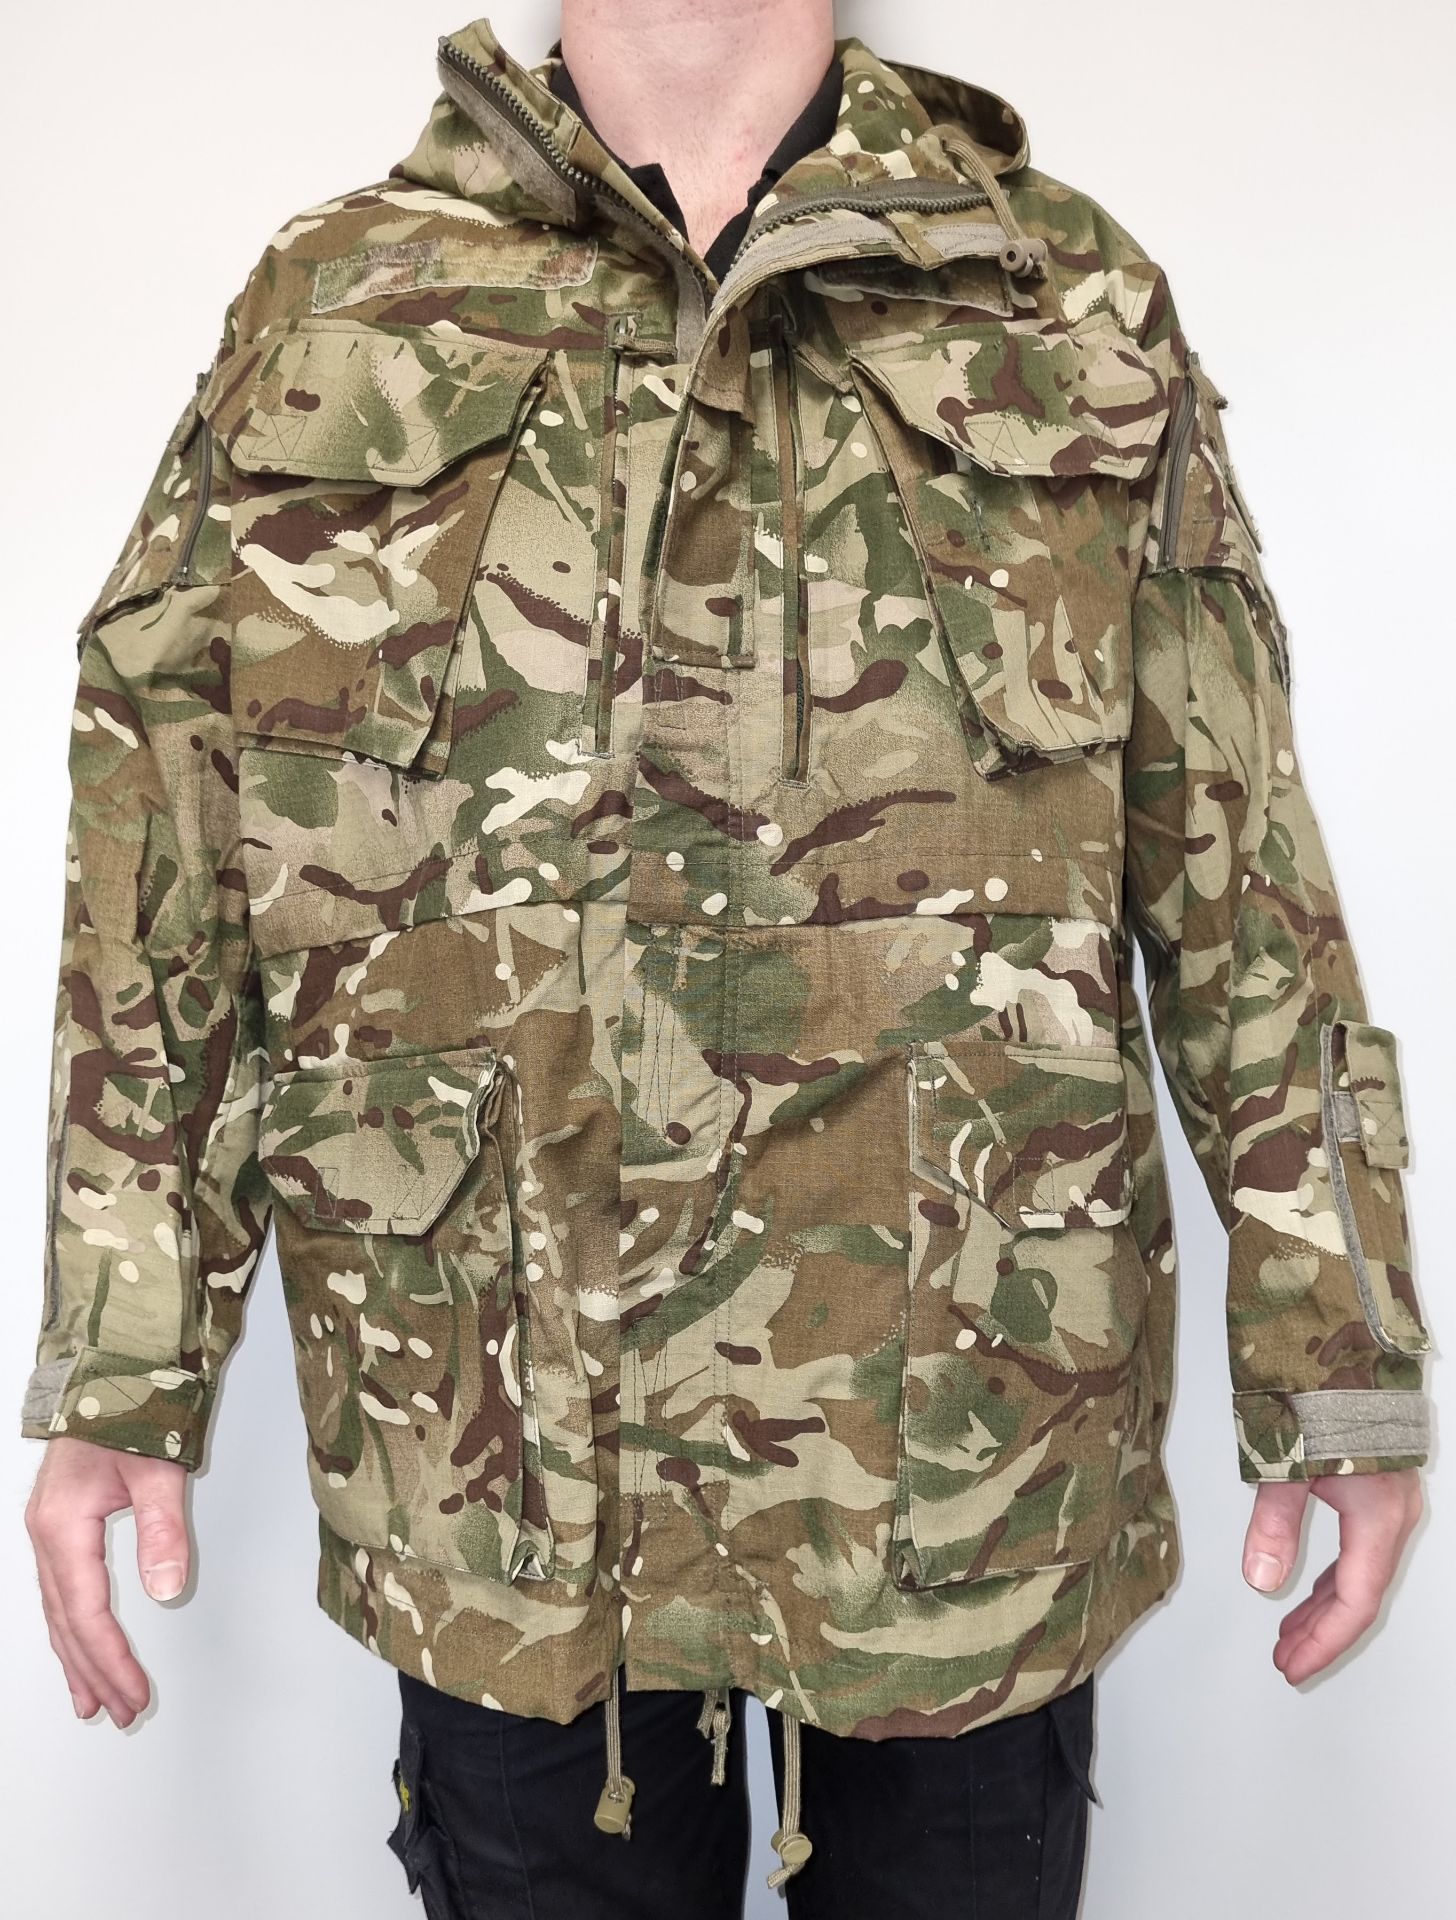 25x British Army MTP windproof smocks - mixed grades and sizes - Image 2 of 9